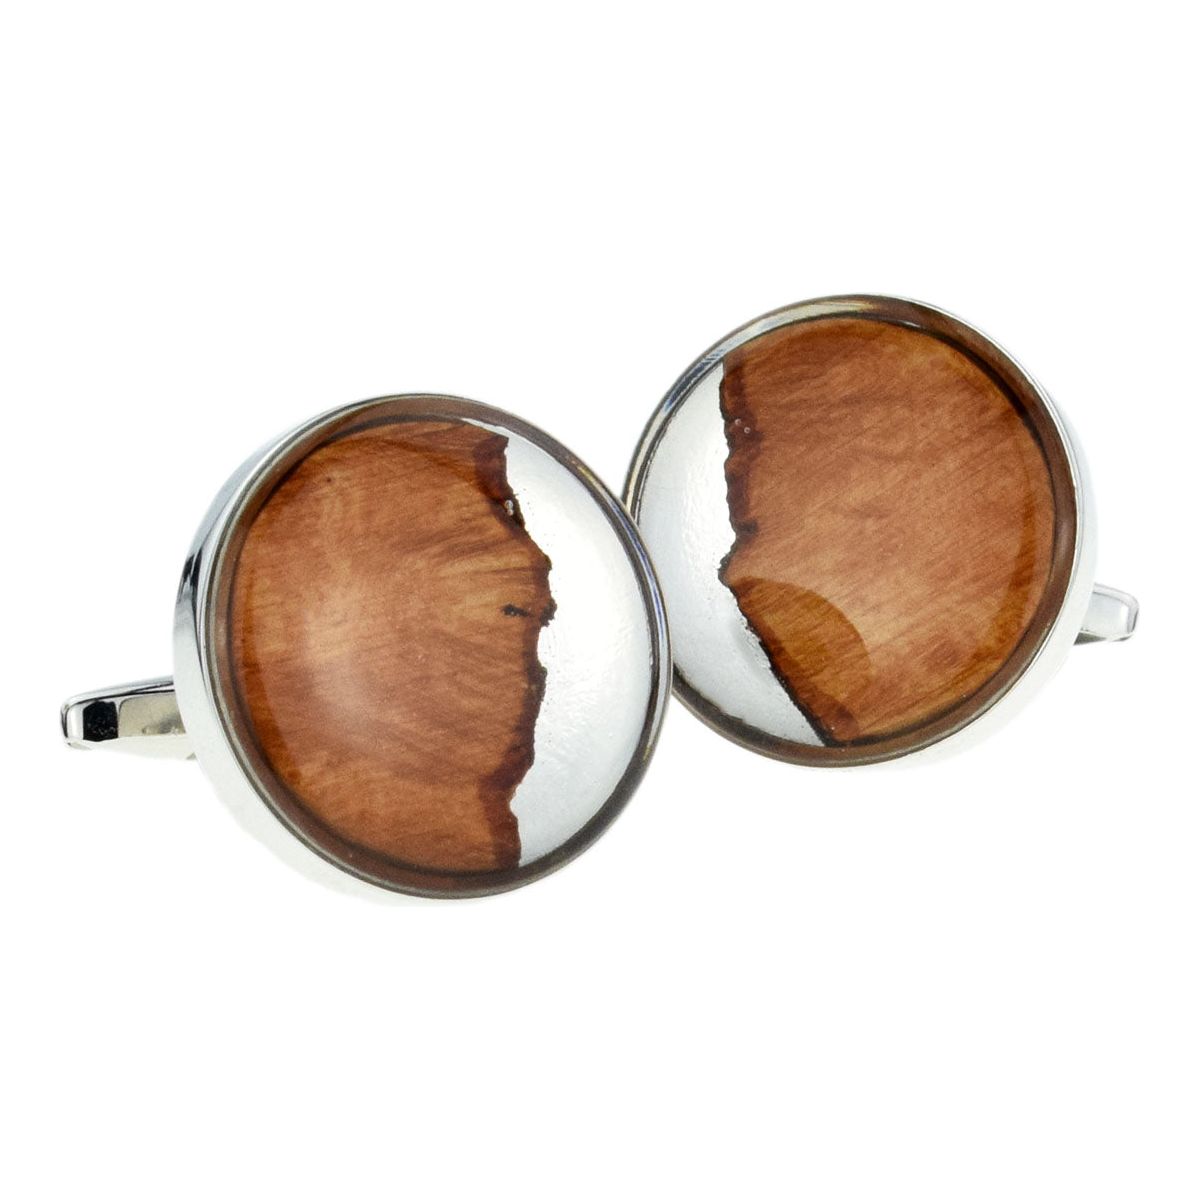 Single Section of Briar Wood Encapsulated Cufflinks - Ashton and Finch